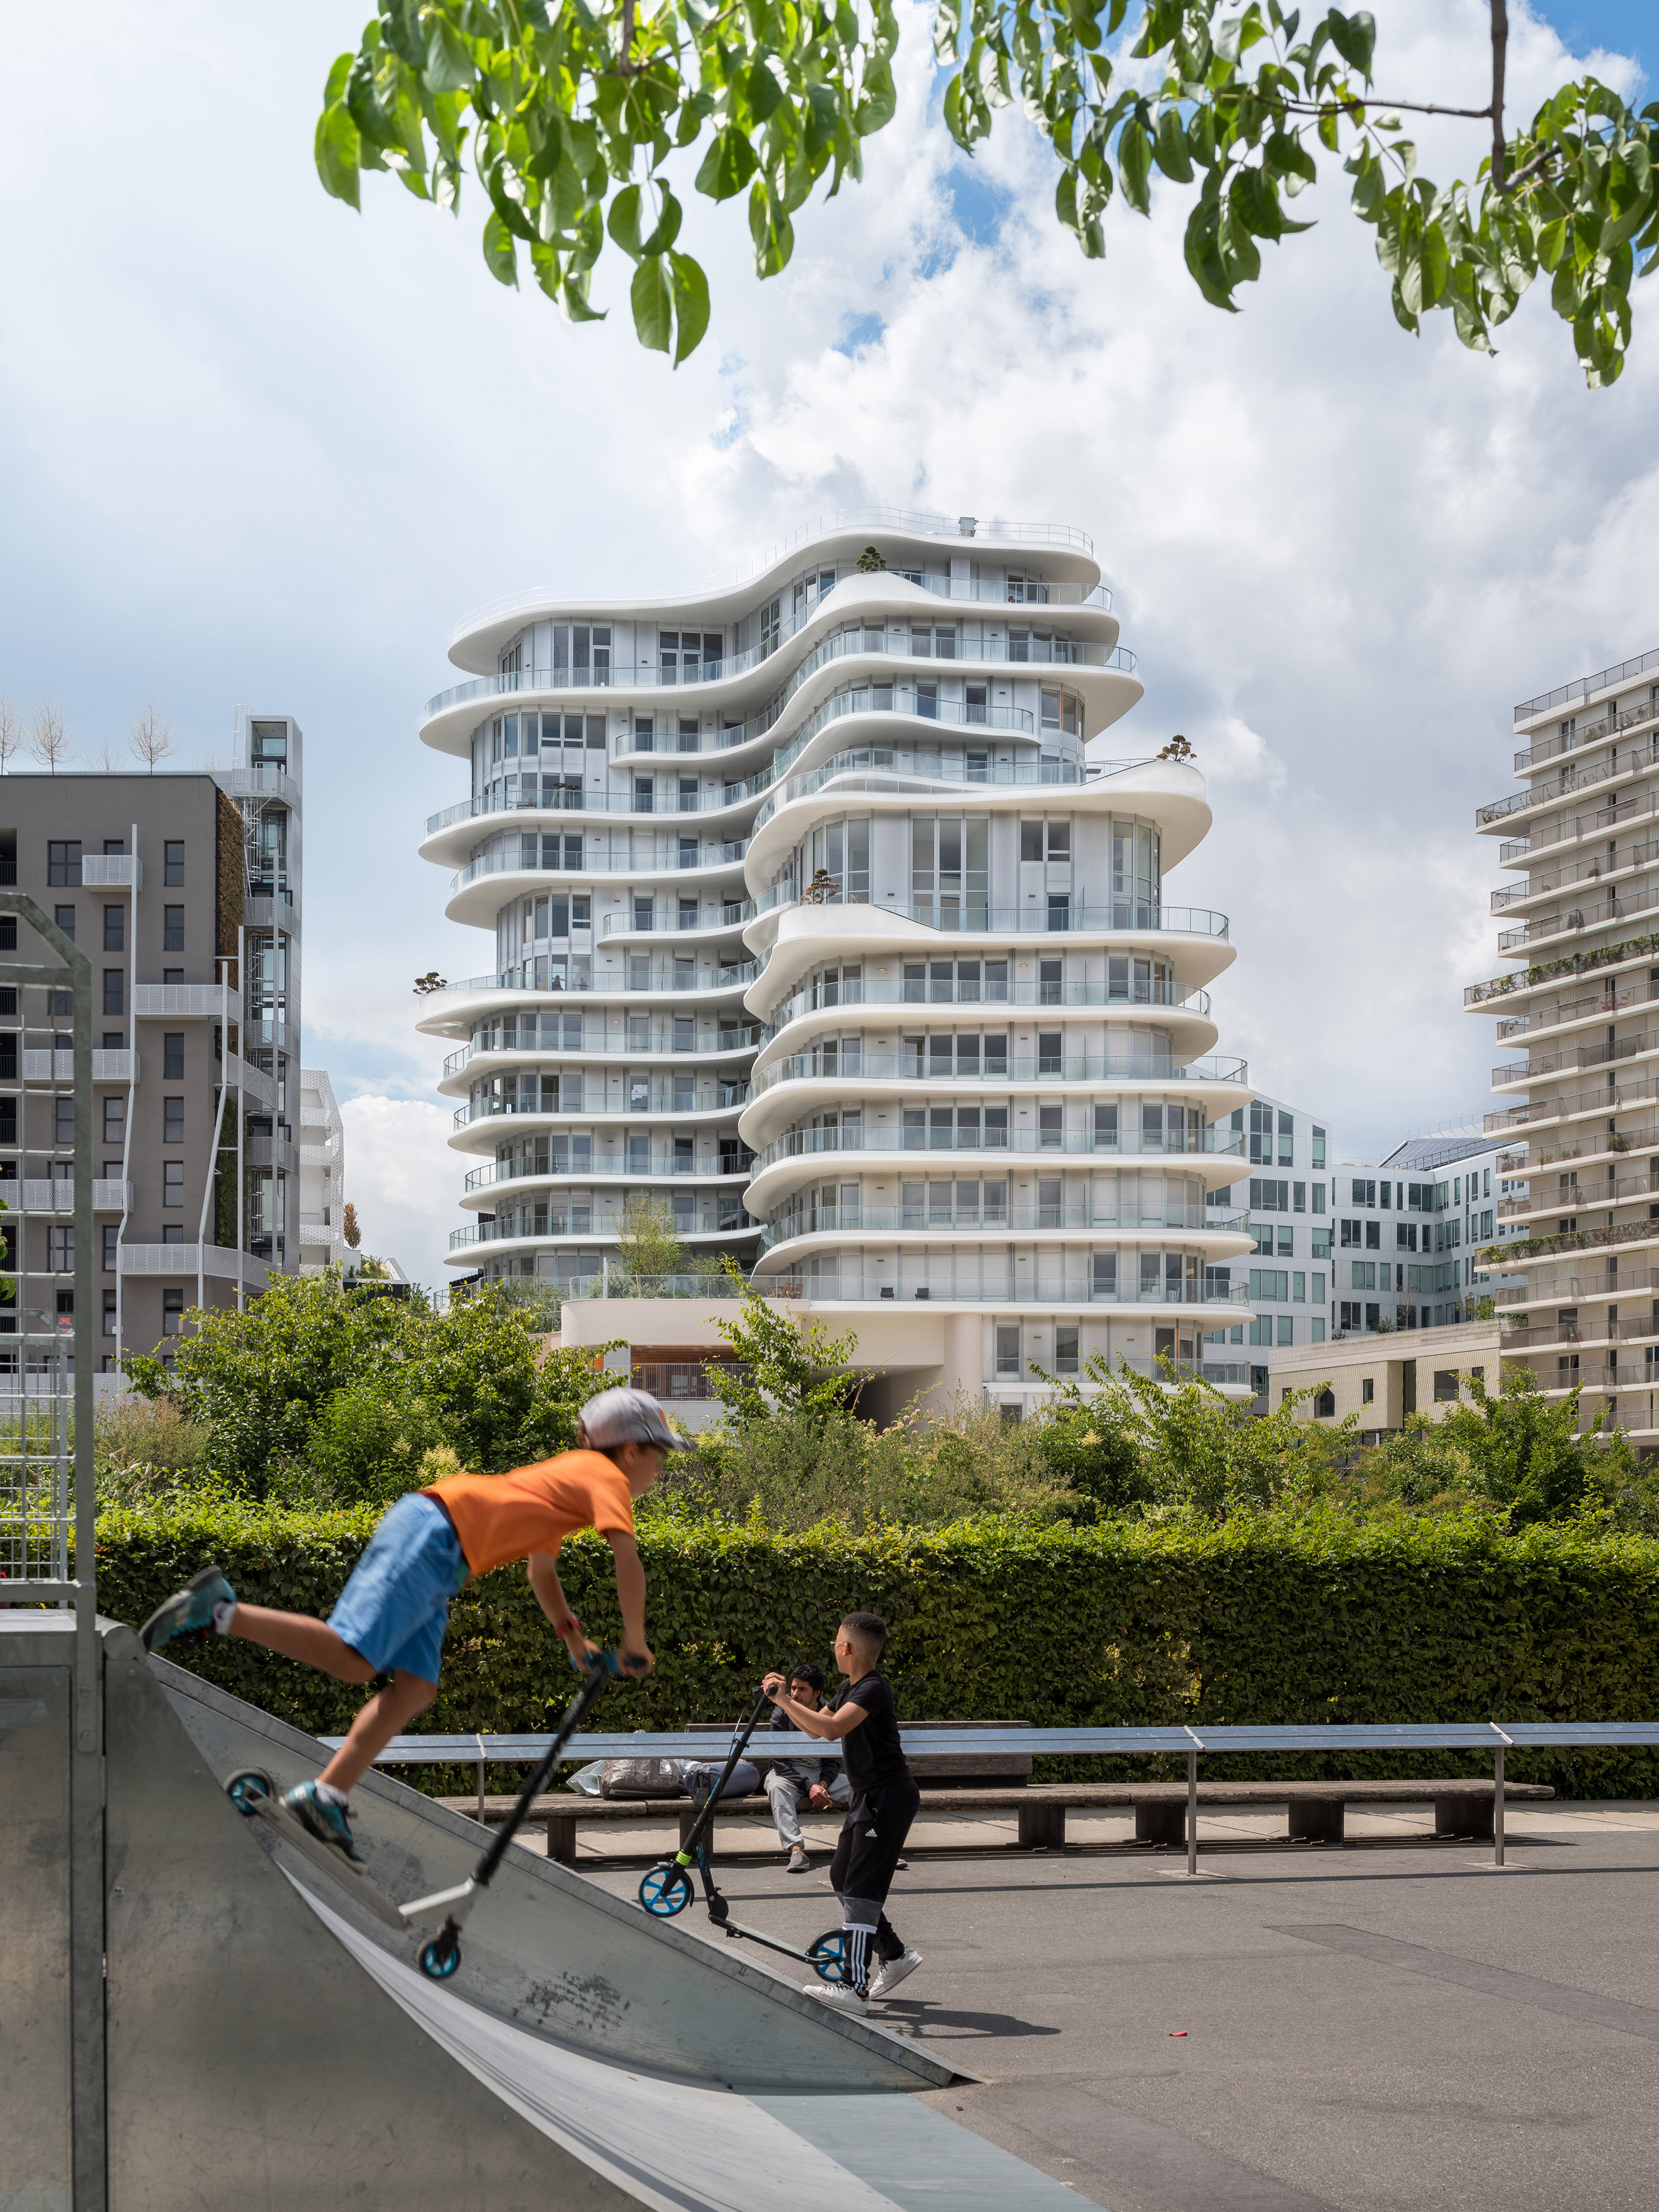 UNIC apartment tower in Paris by MAD and Biecher Architectes